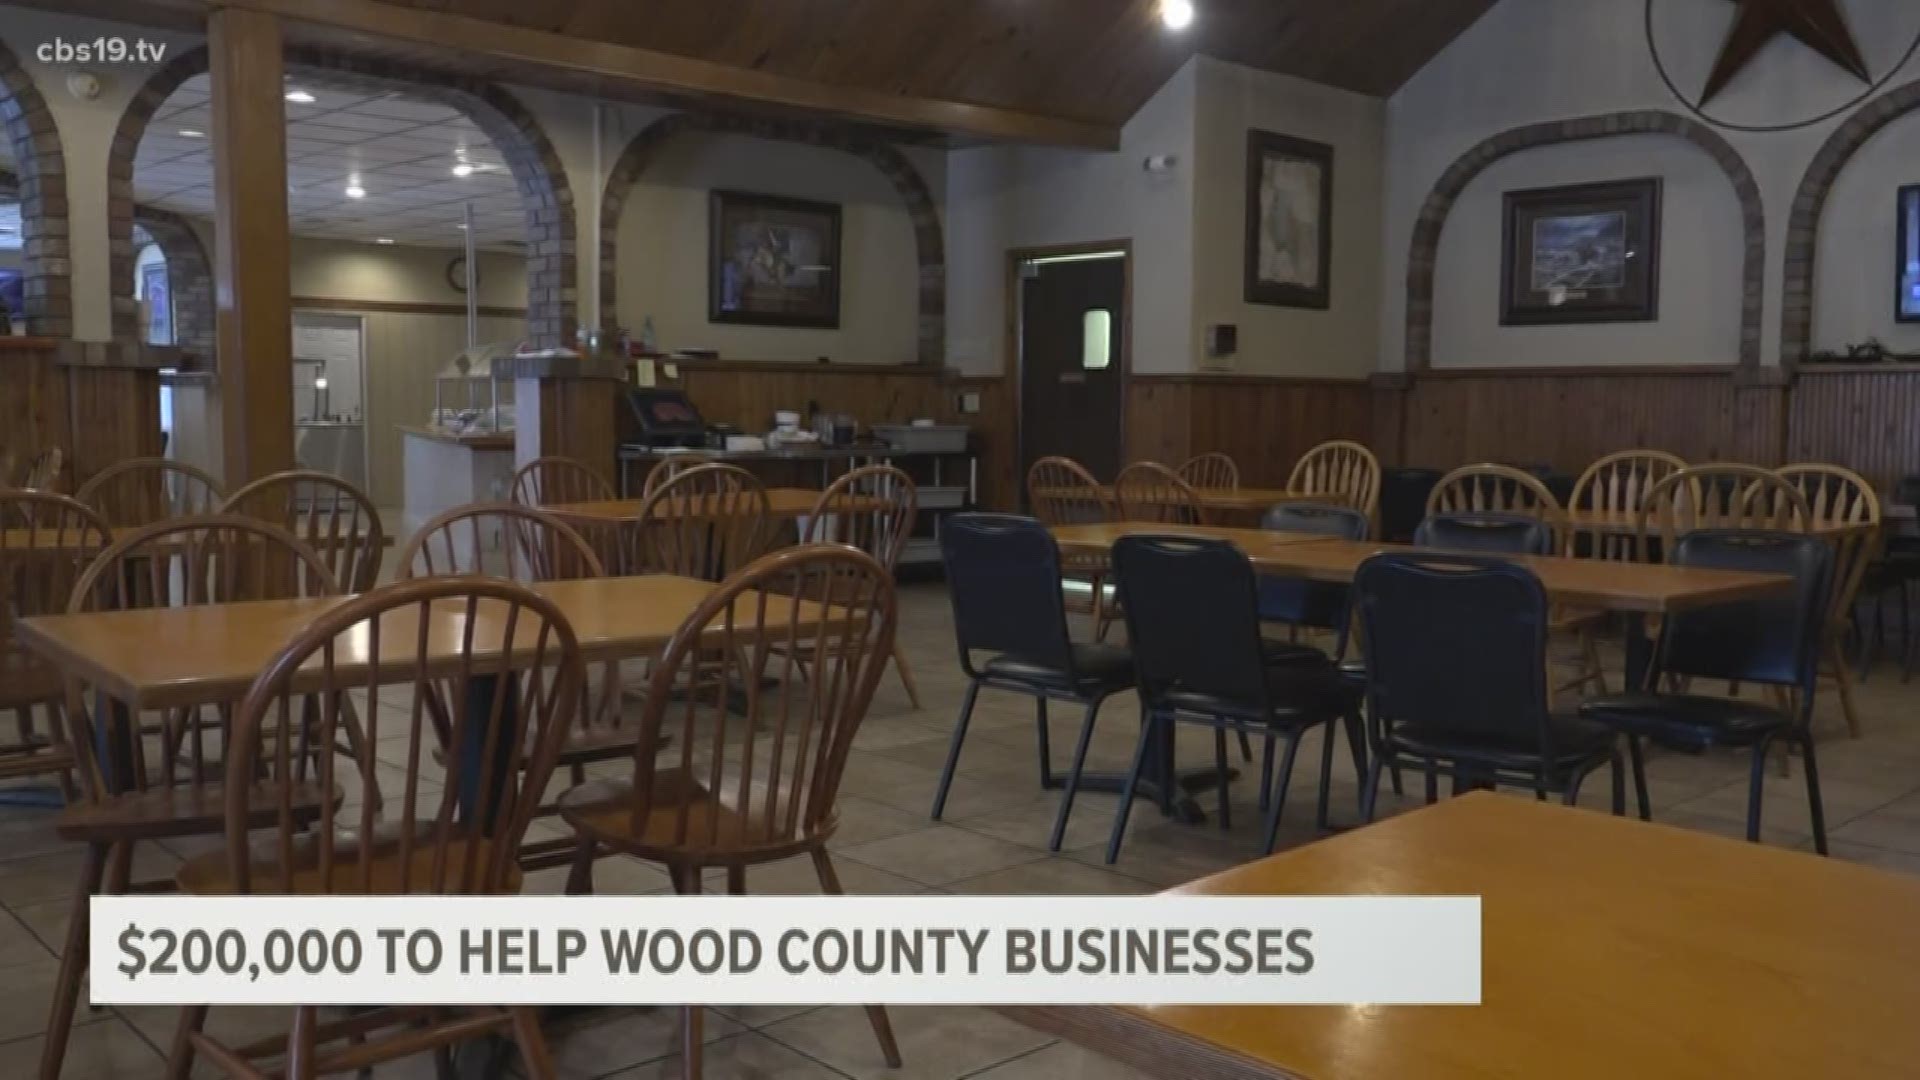 The Wood County Economic Development Commission will give the money to local business to keep their doors open.